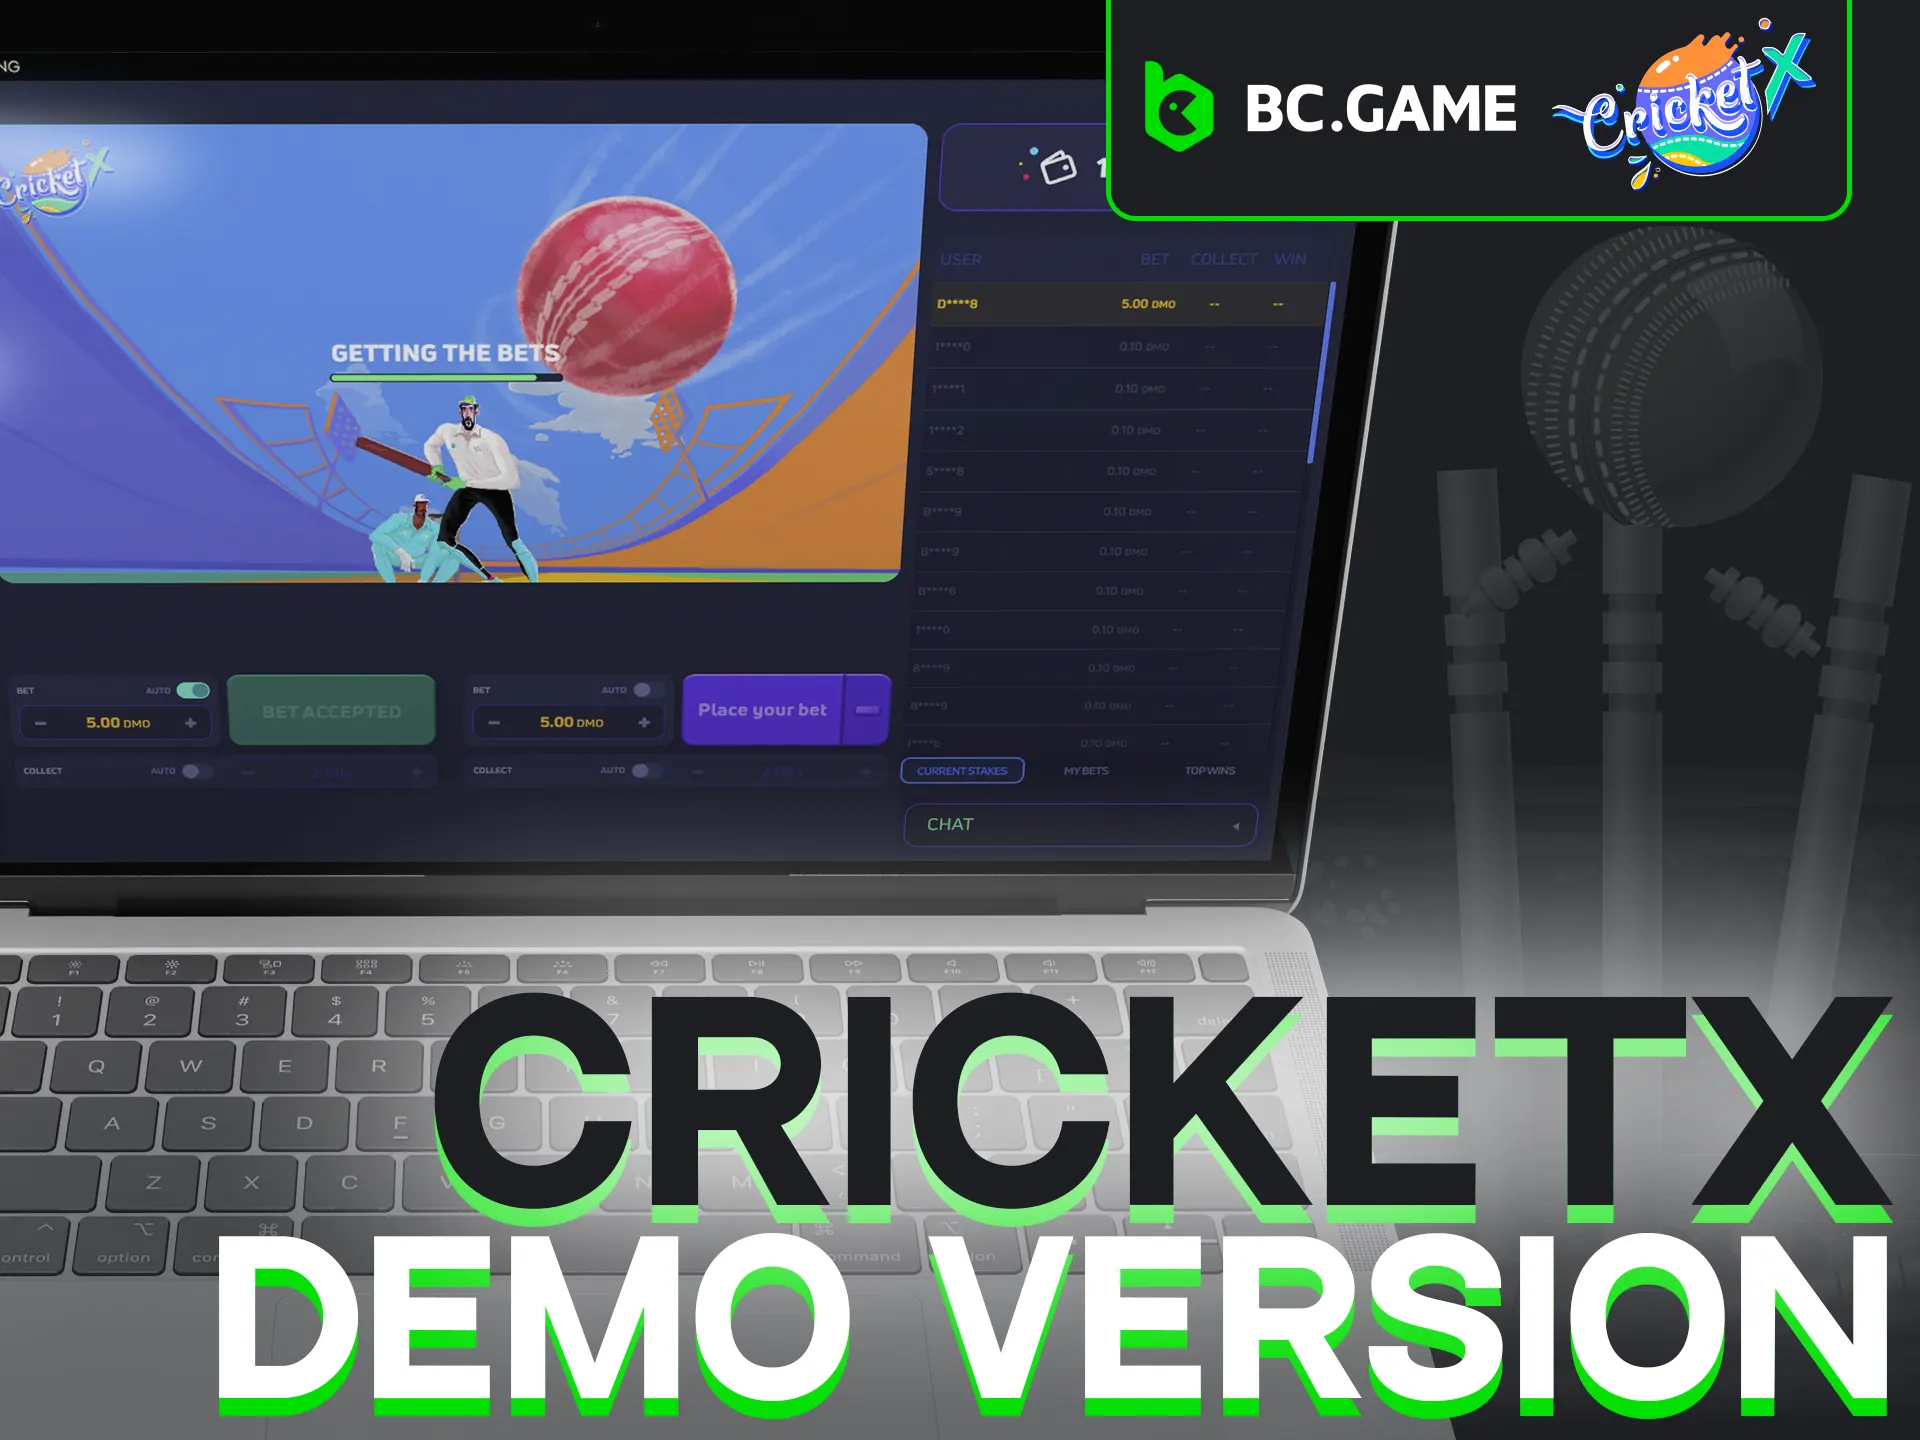 Practice Cricket X free with BC Game's demo version.